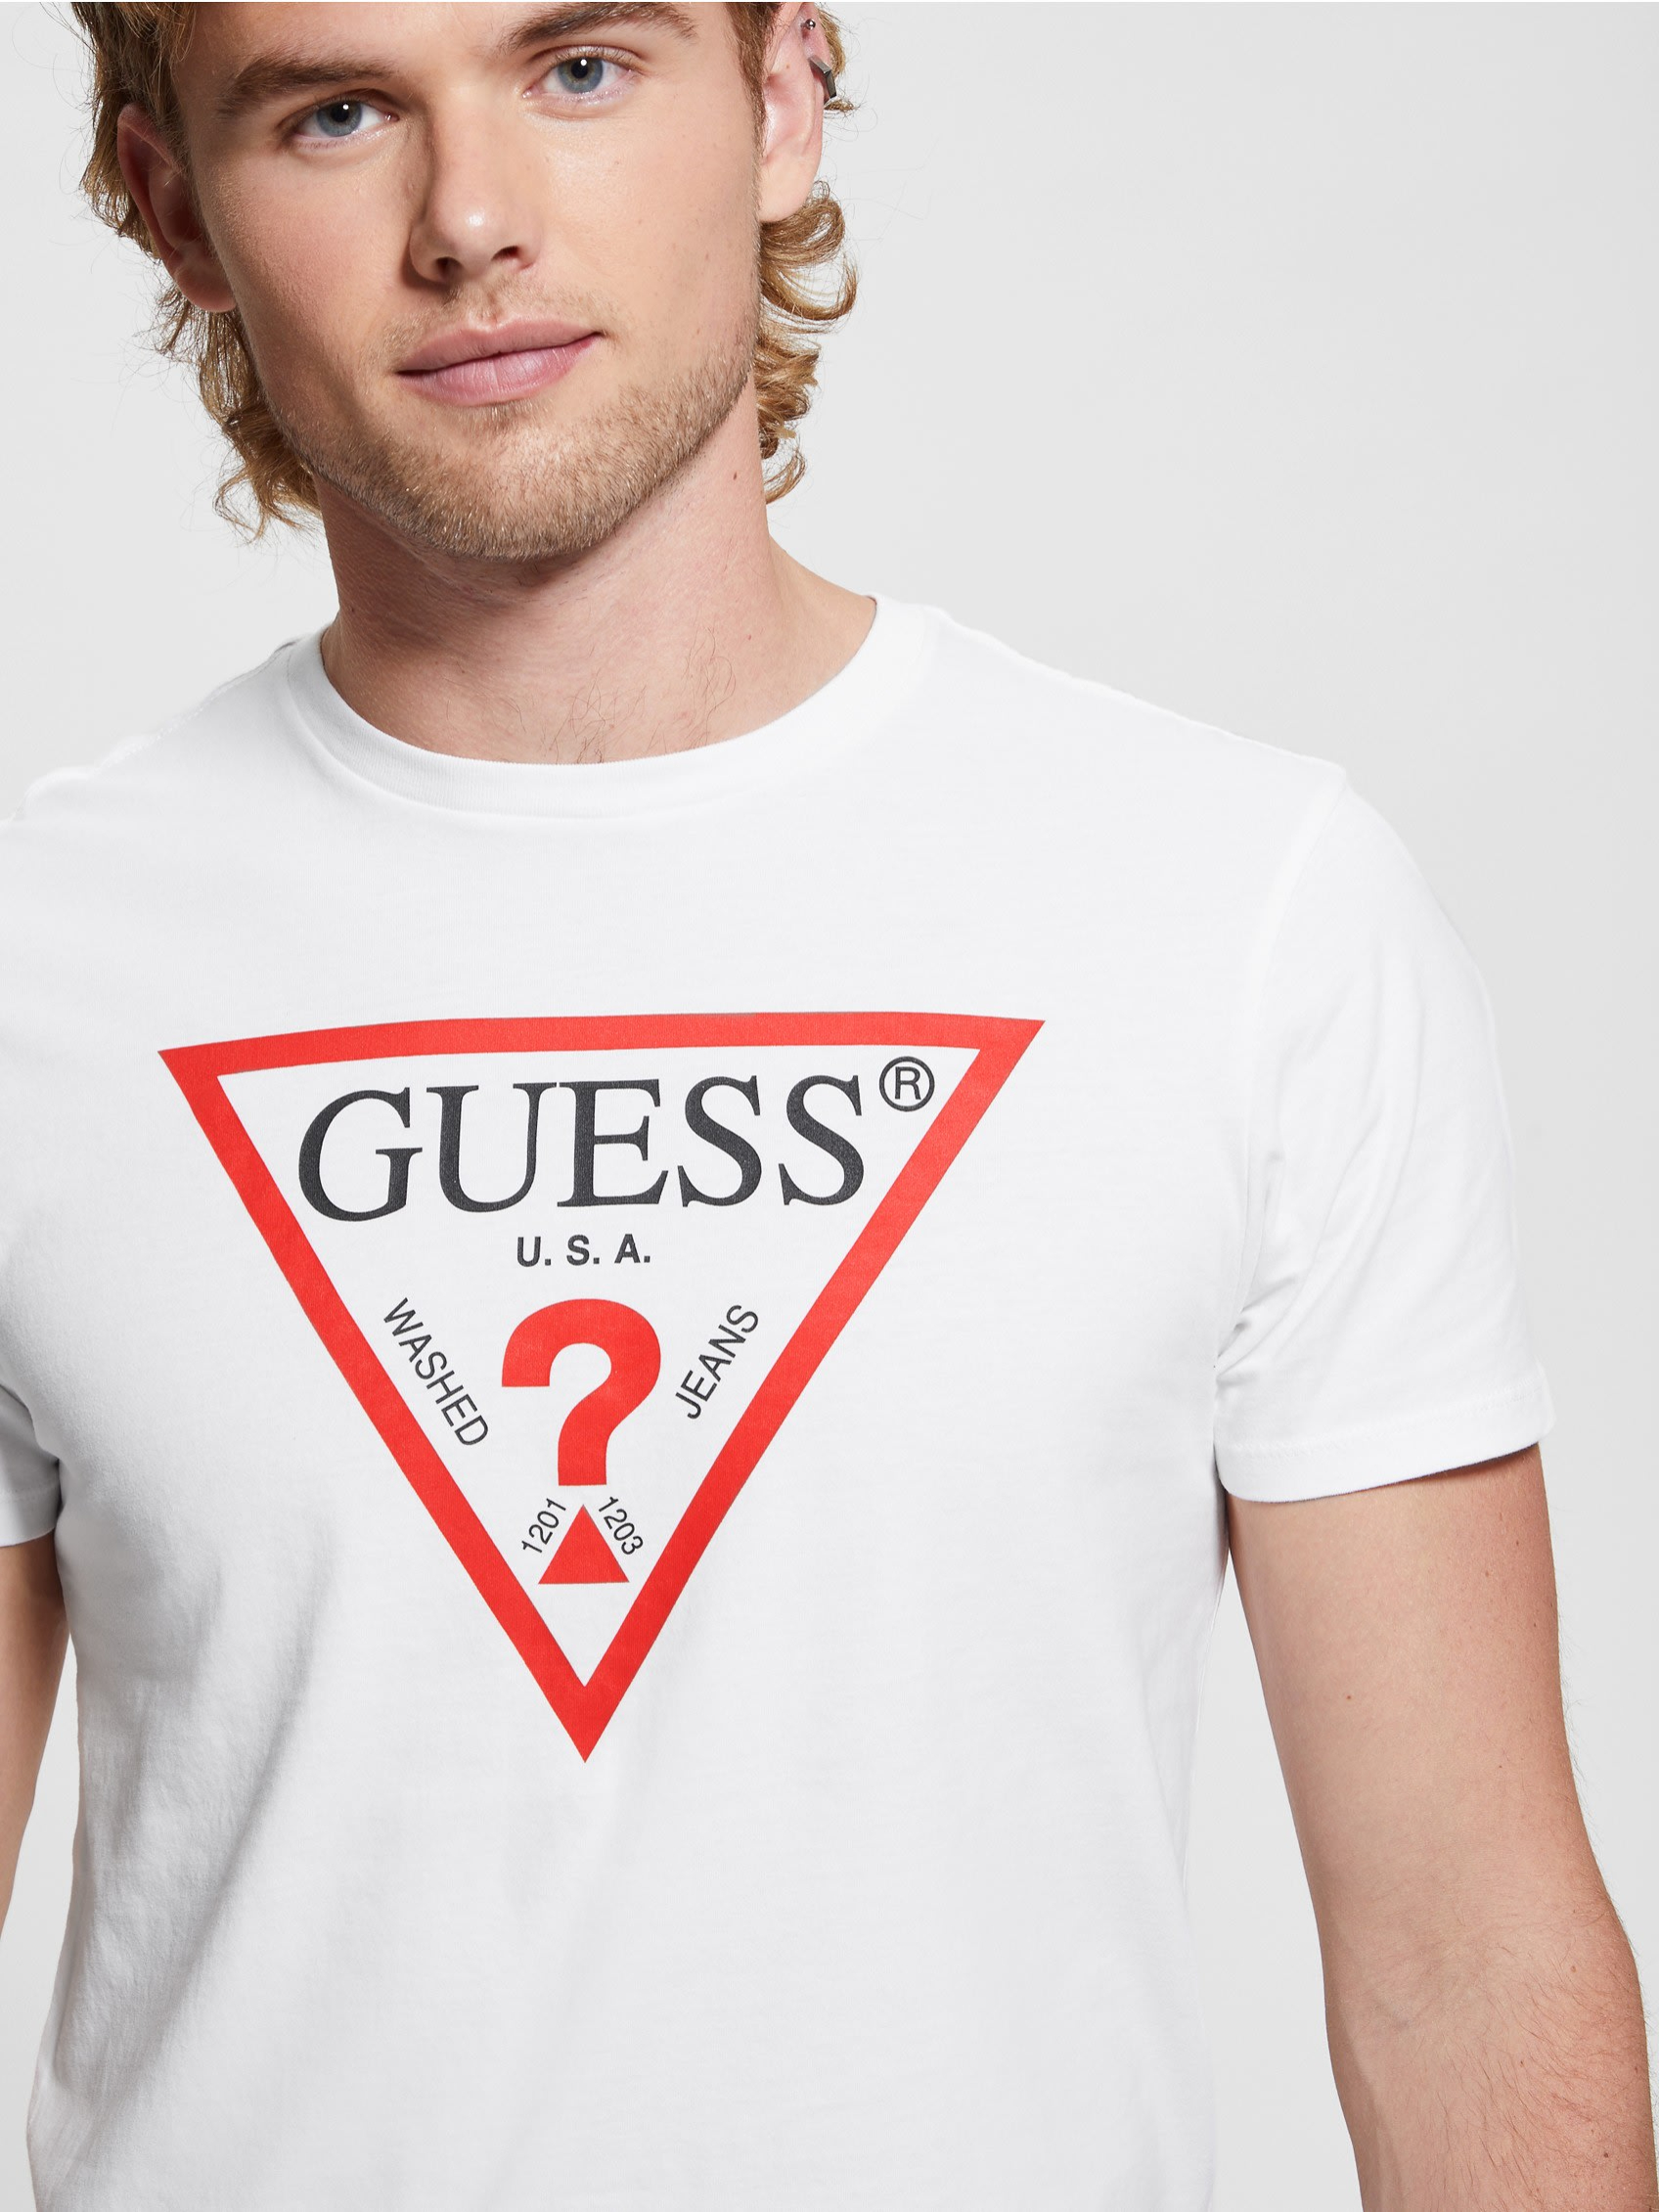 CLASSIC LOGO TEE | Guess Philippines